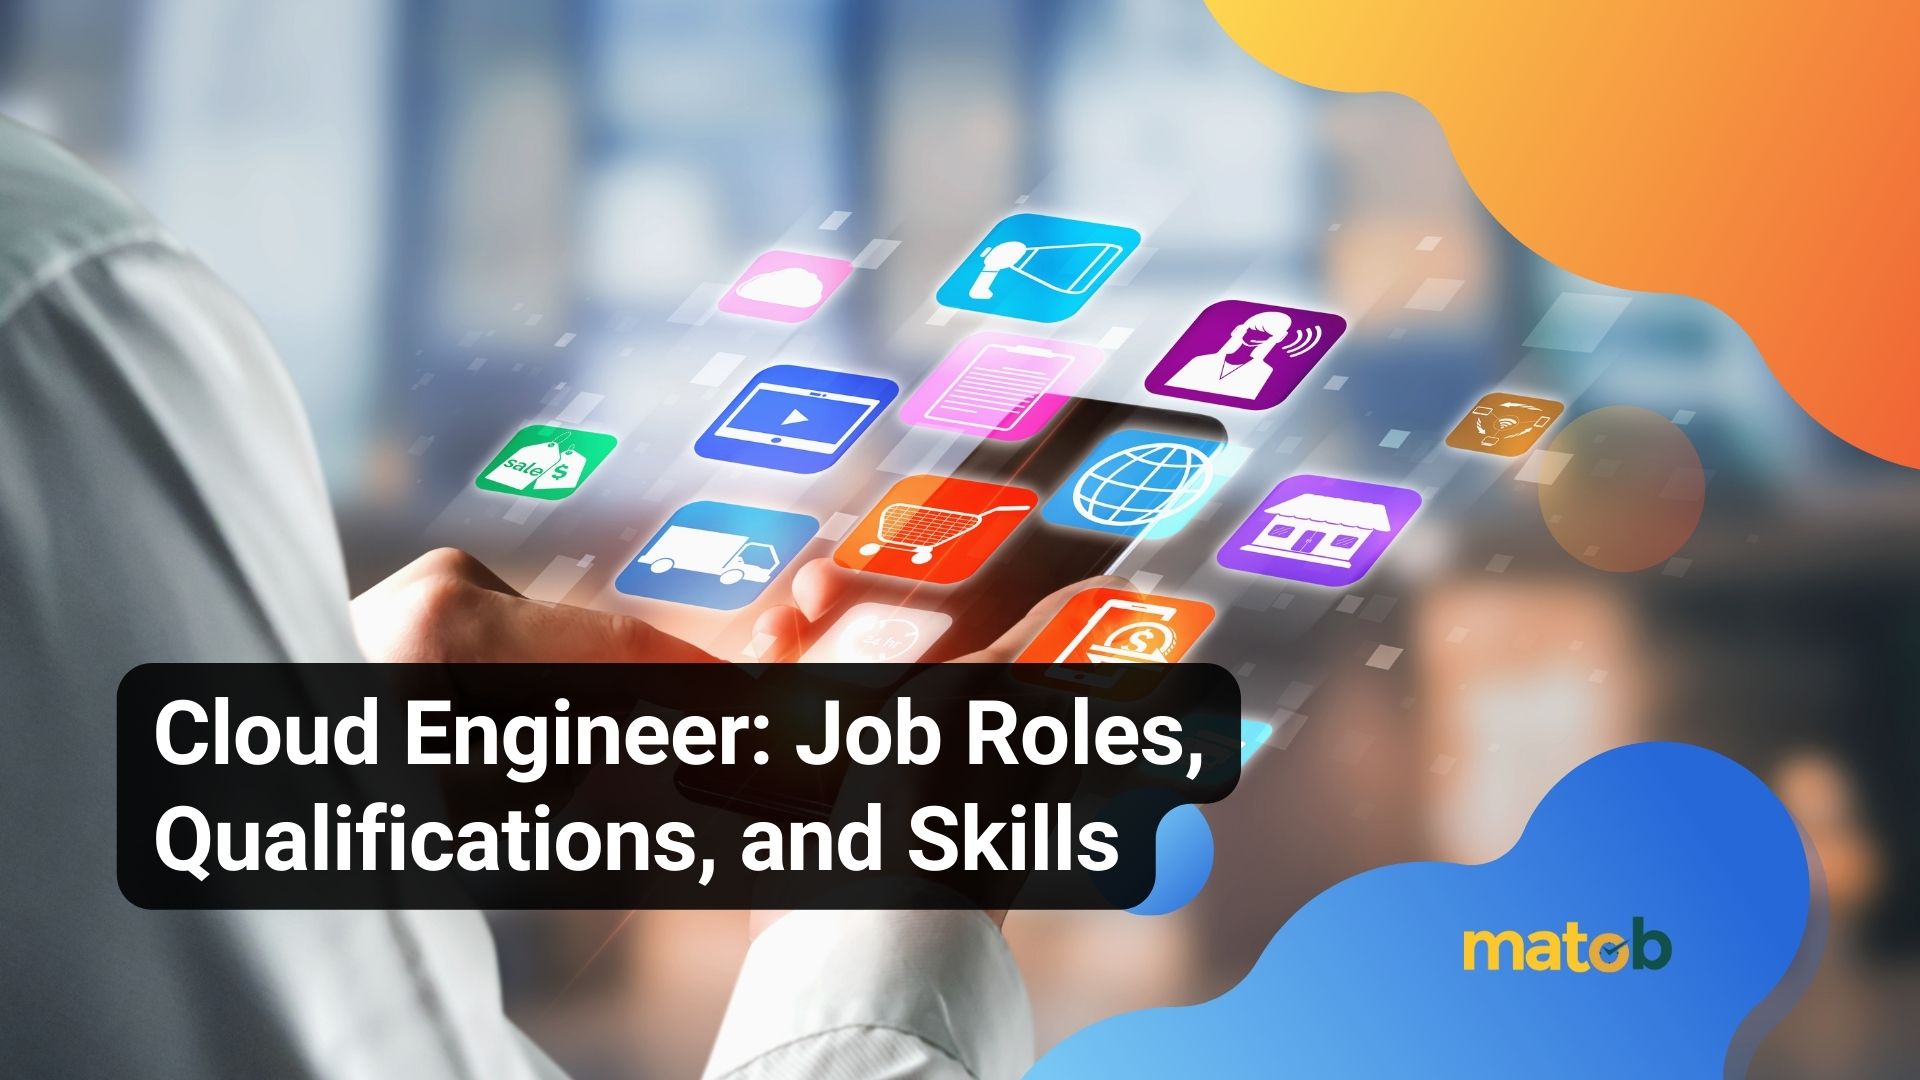 Cloud Engineer: Job Roles, Qualifications, and Skills